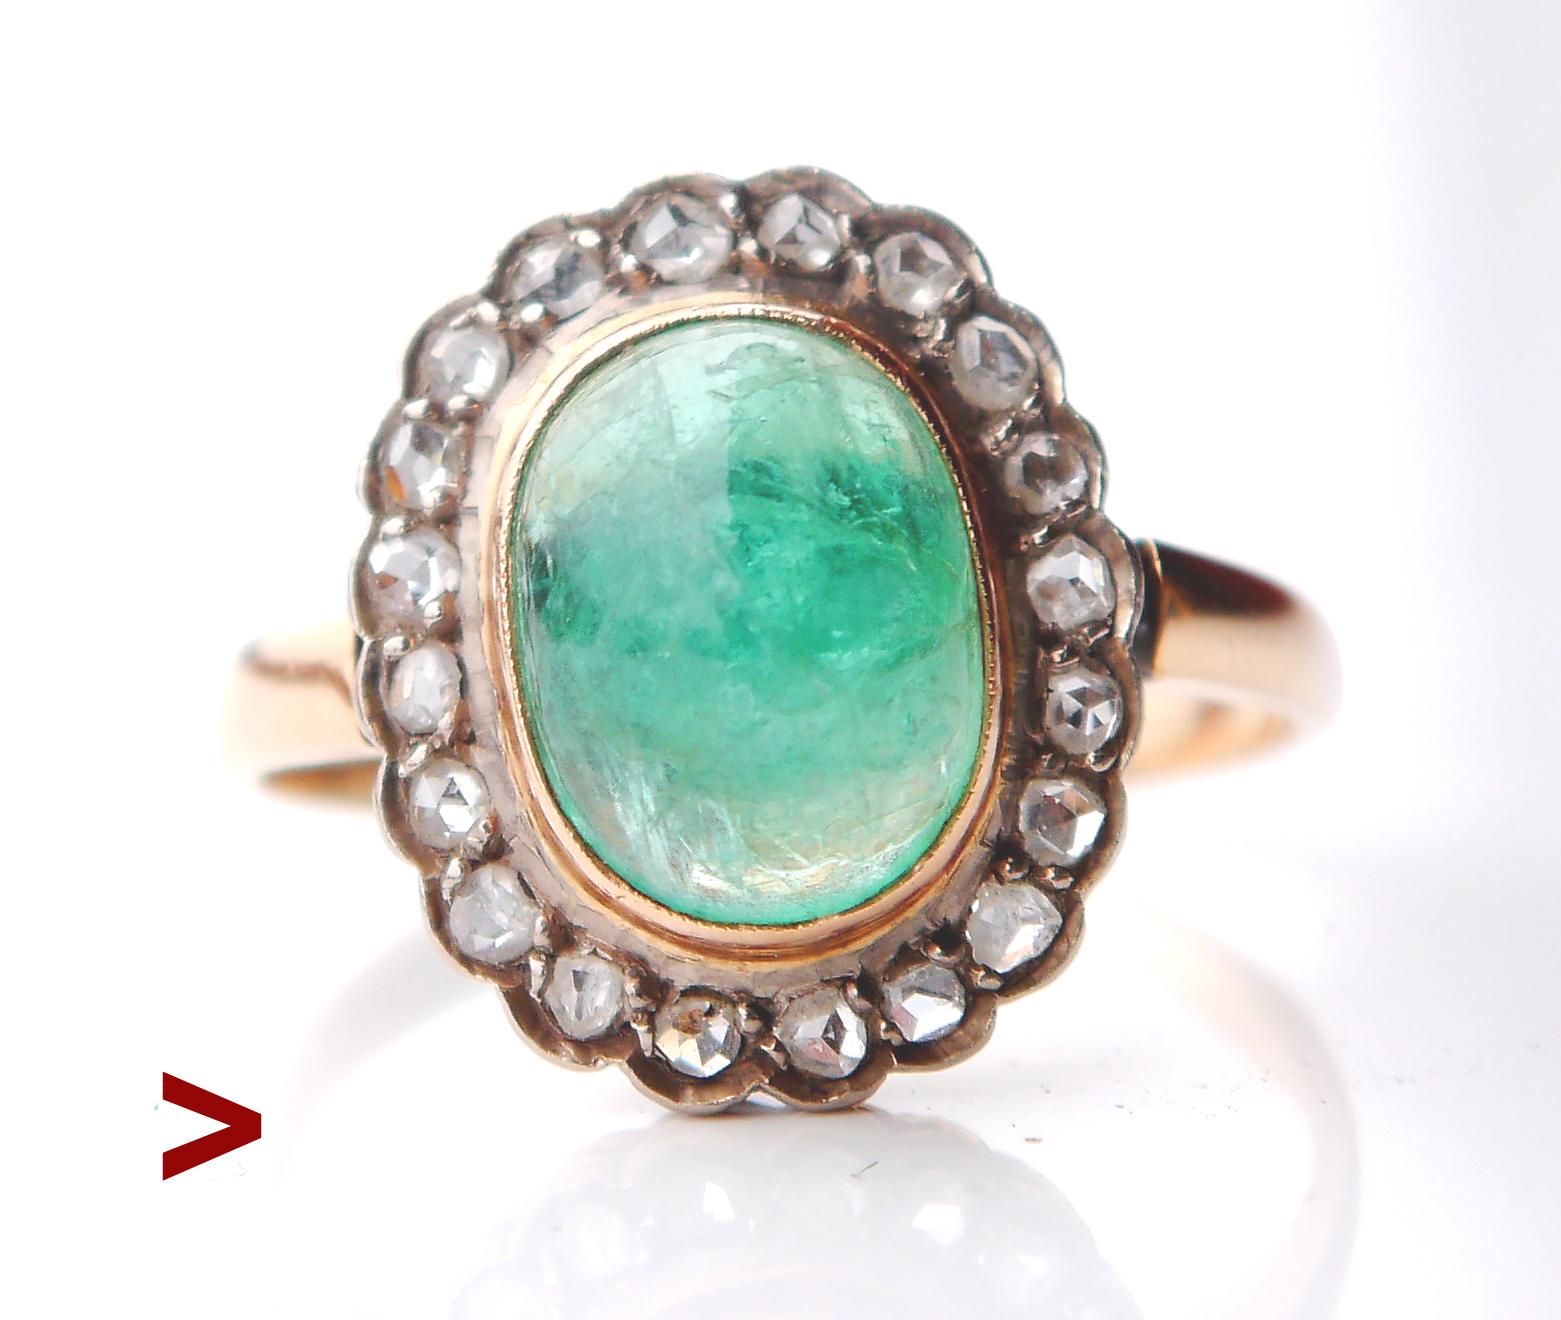 Beautiful 583 Gold, Silver, Emerald and Diamonds Halo Ring.
Metal is solid 14k/ 583 Yellow Gold with clusters in white Gold featuring bezel set natural untreated Emerald cabochon cut 12 mm x 10 mm x 7 mm deep / ca. 6 ct .Stone is semitransparent of